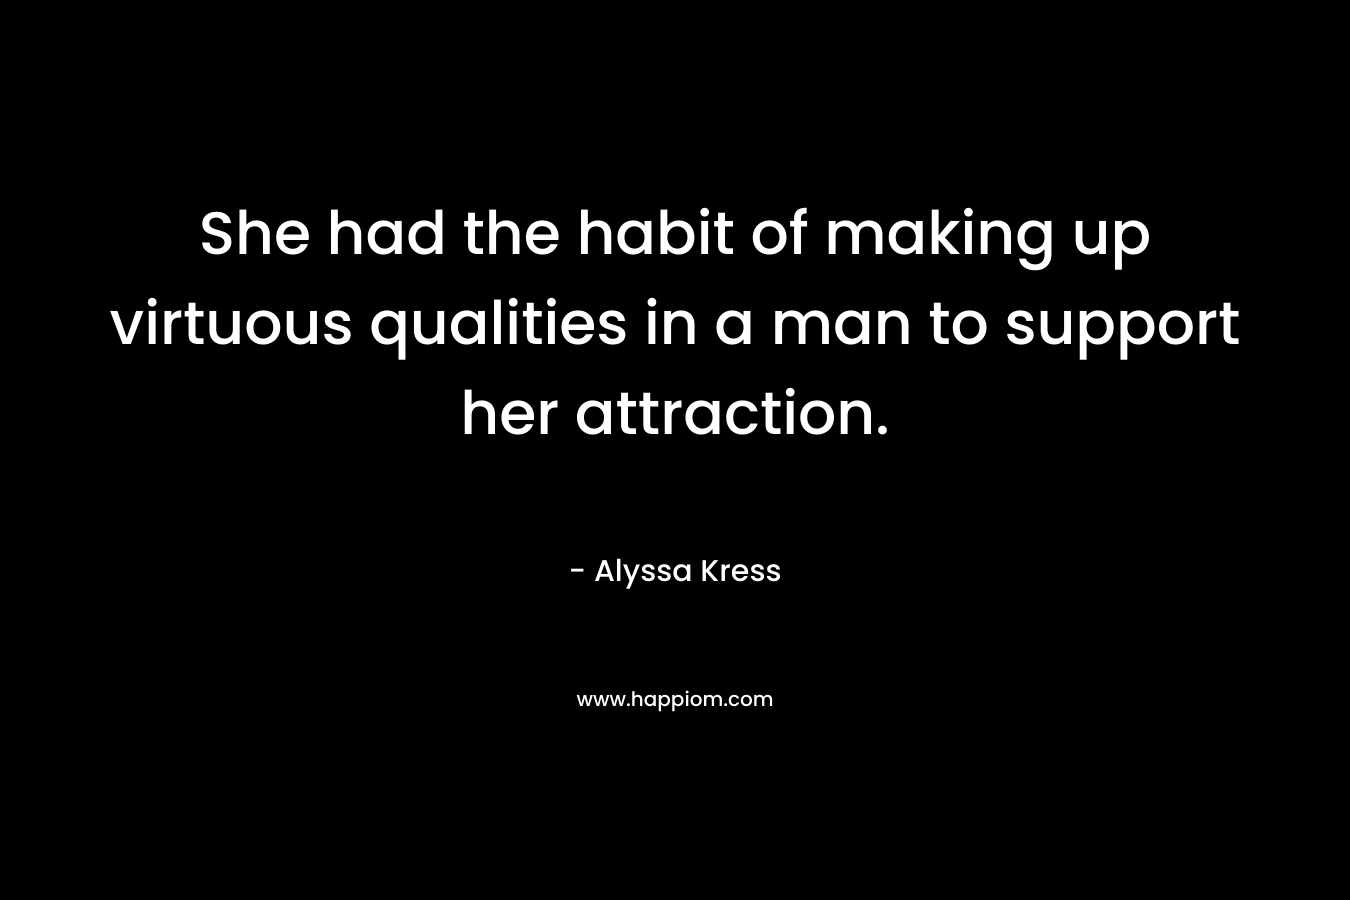 She had the habit of making up virtuous qualities in a man to support her attraction.